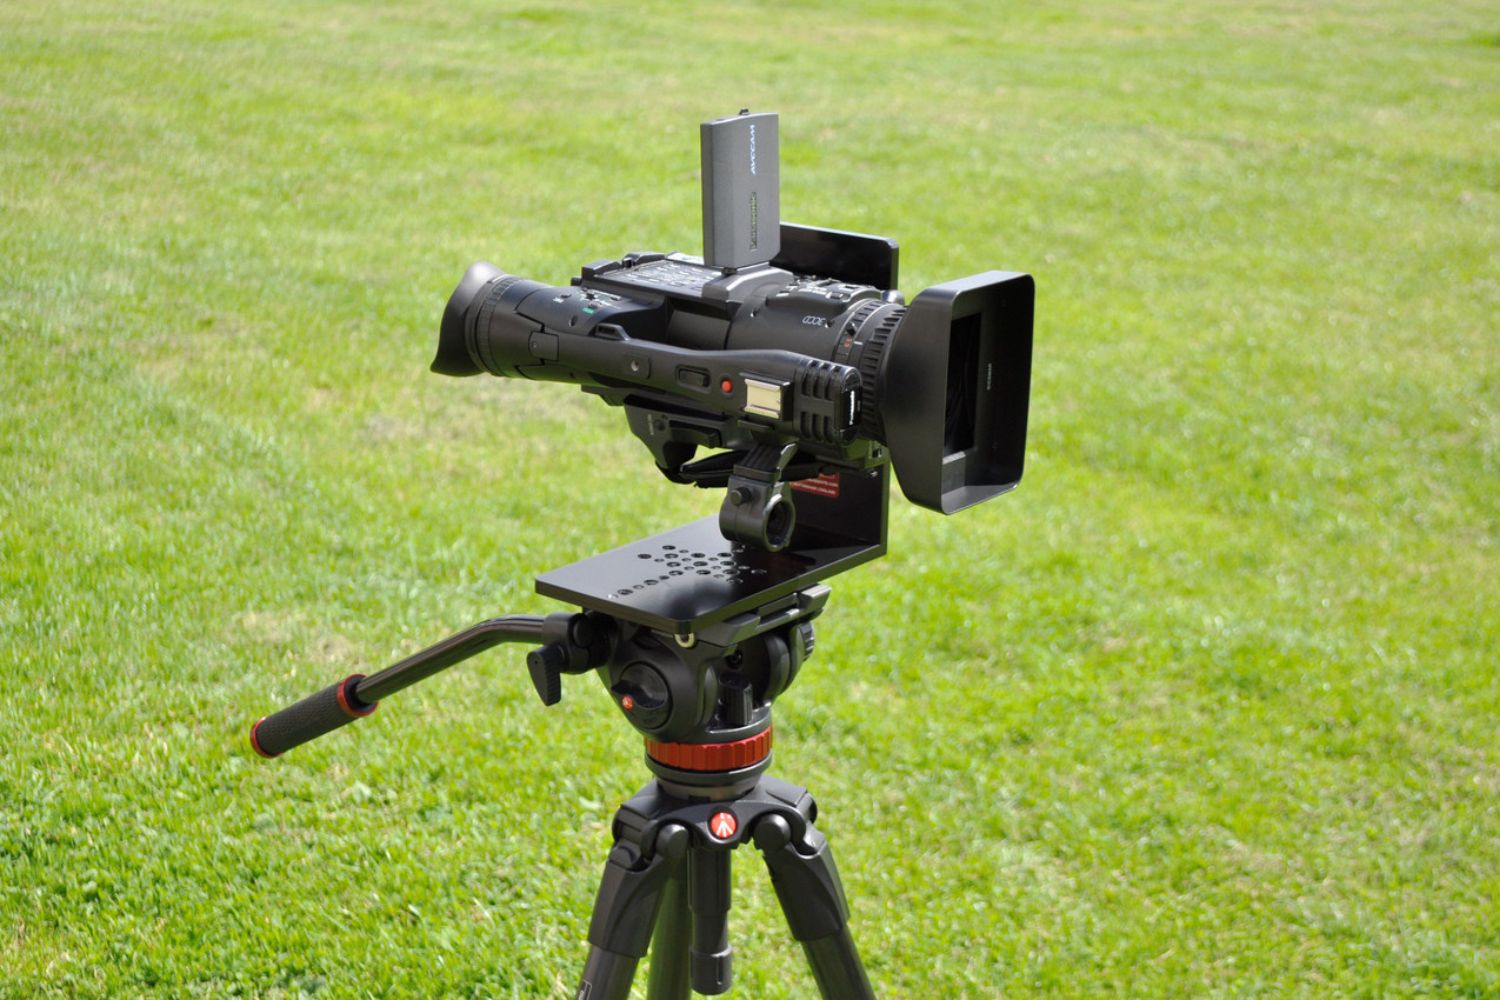 How To Mount A Camcorder On A Tripod